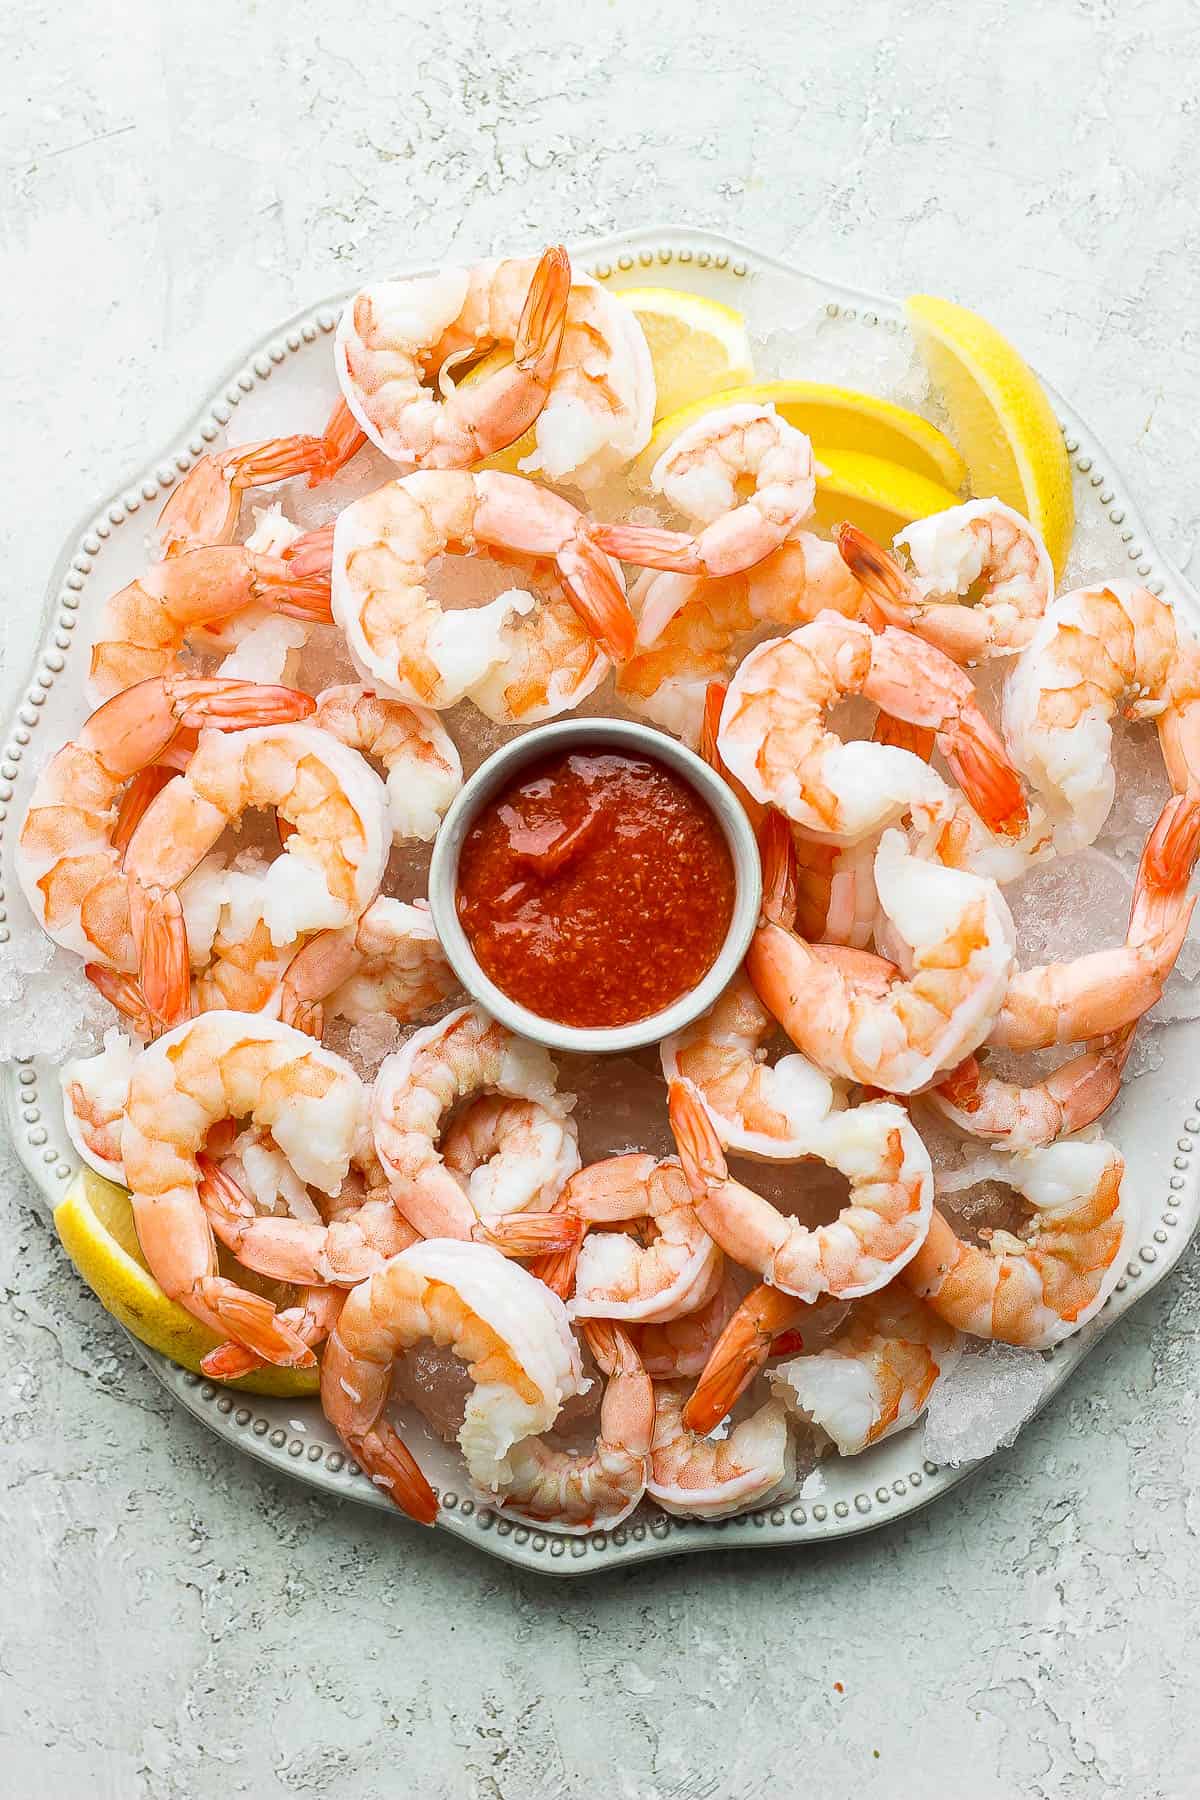 A platter of shrimp on a bed of ice, garnished with lemon wedges and a small bowl of shrimp cocktail in the middle.